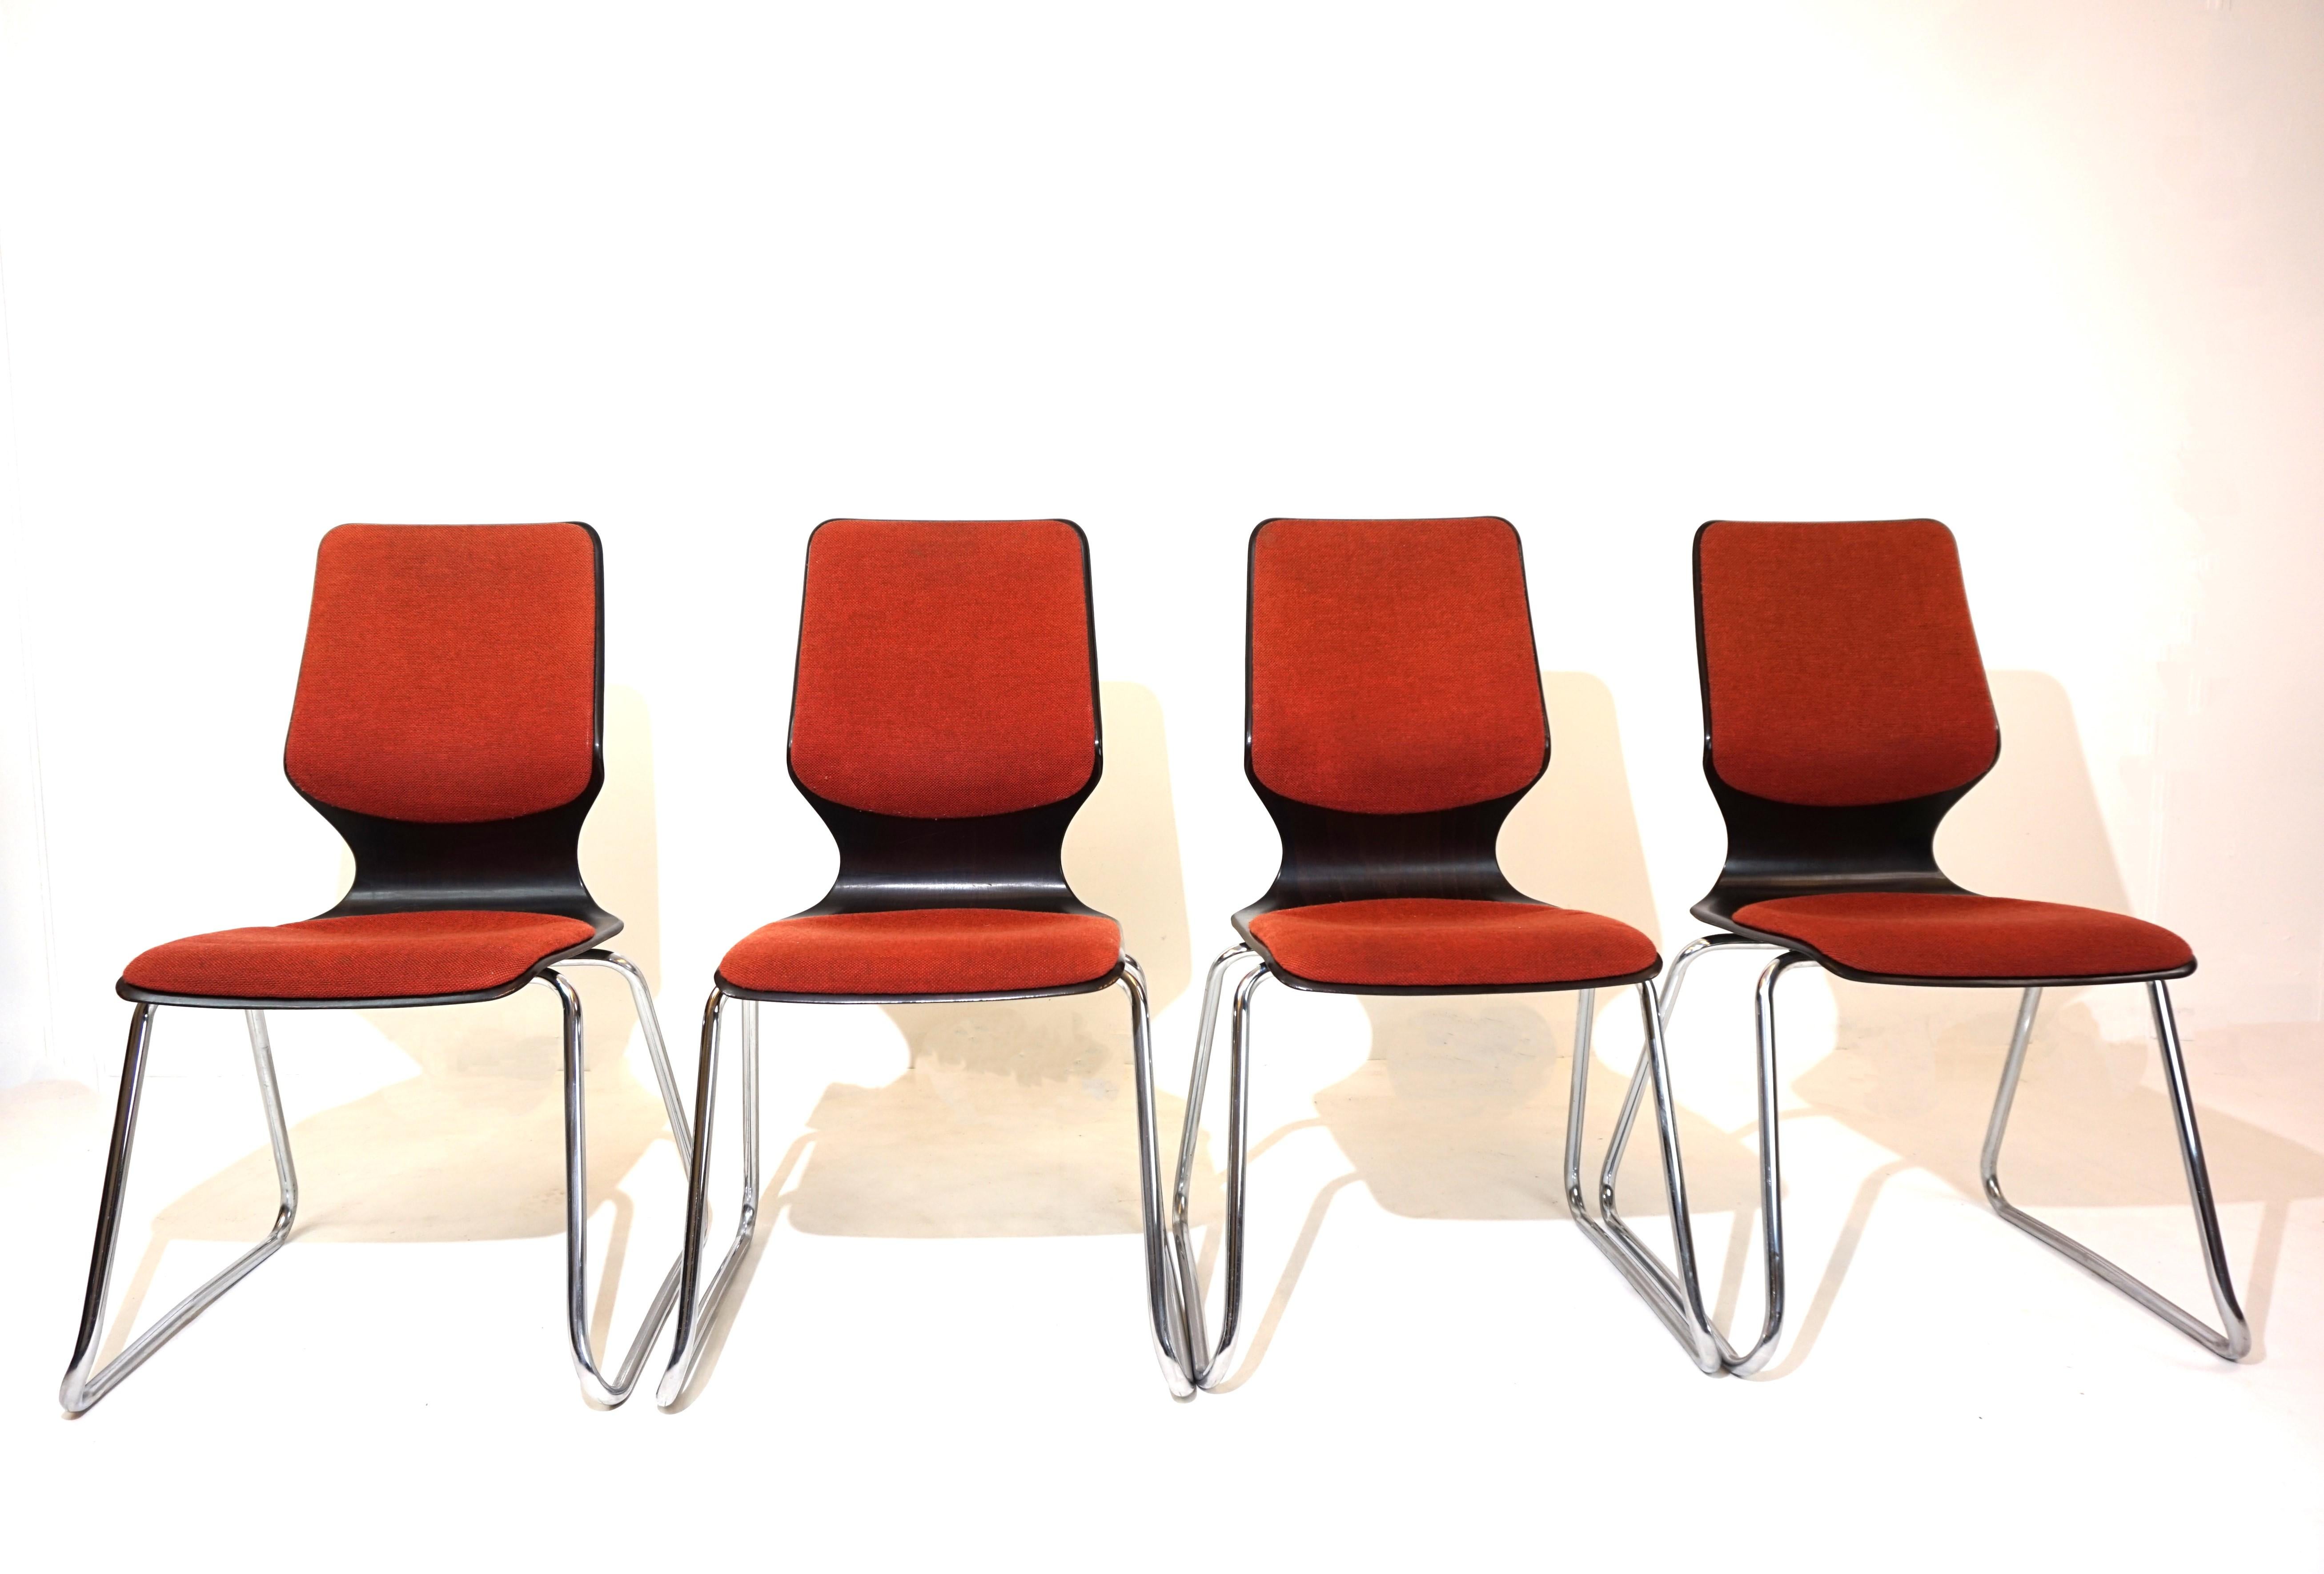 Flötotto set of 4 Pagholz chairs by Elmar Flötotto For Sale 3